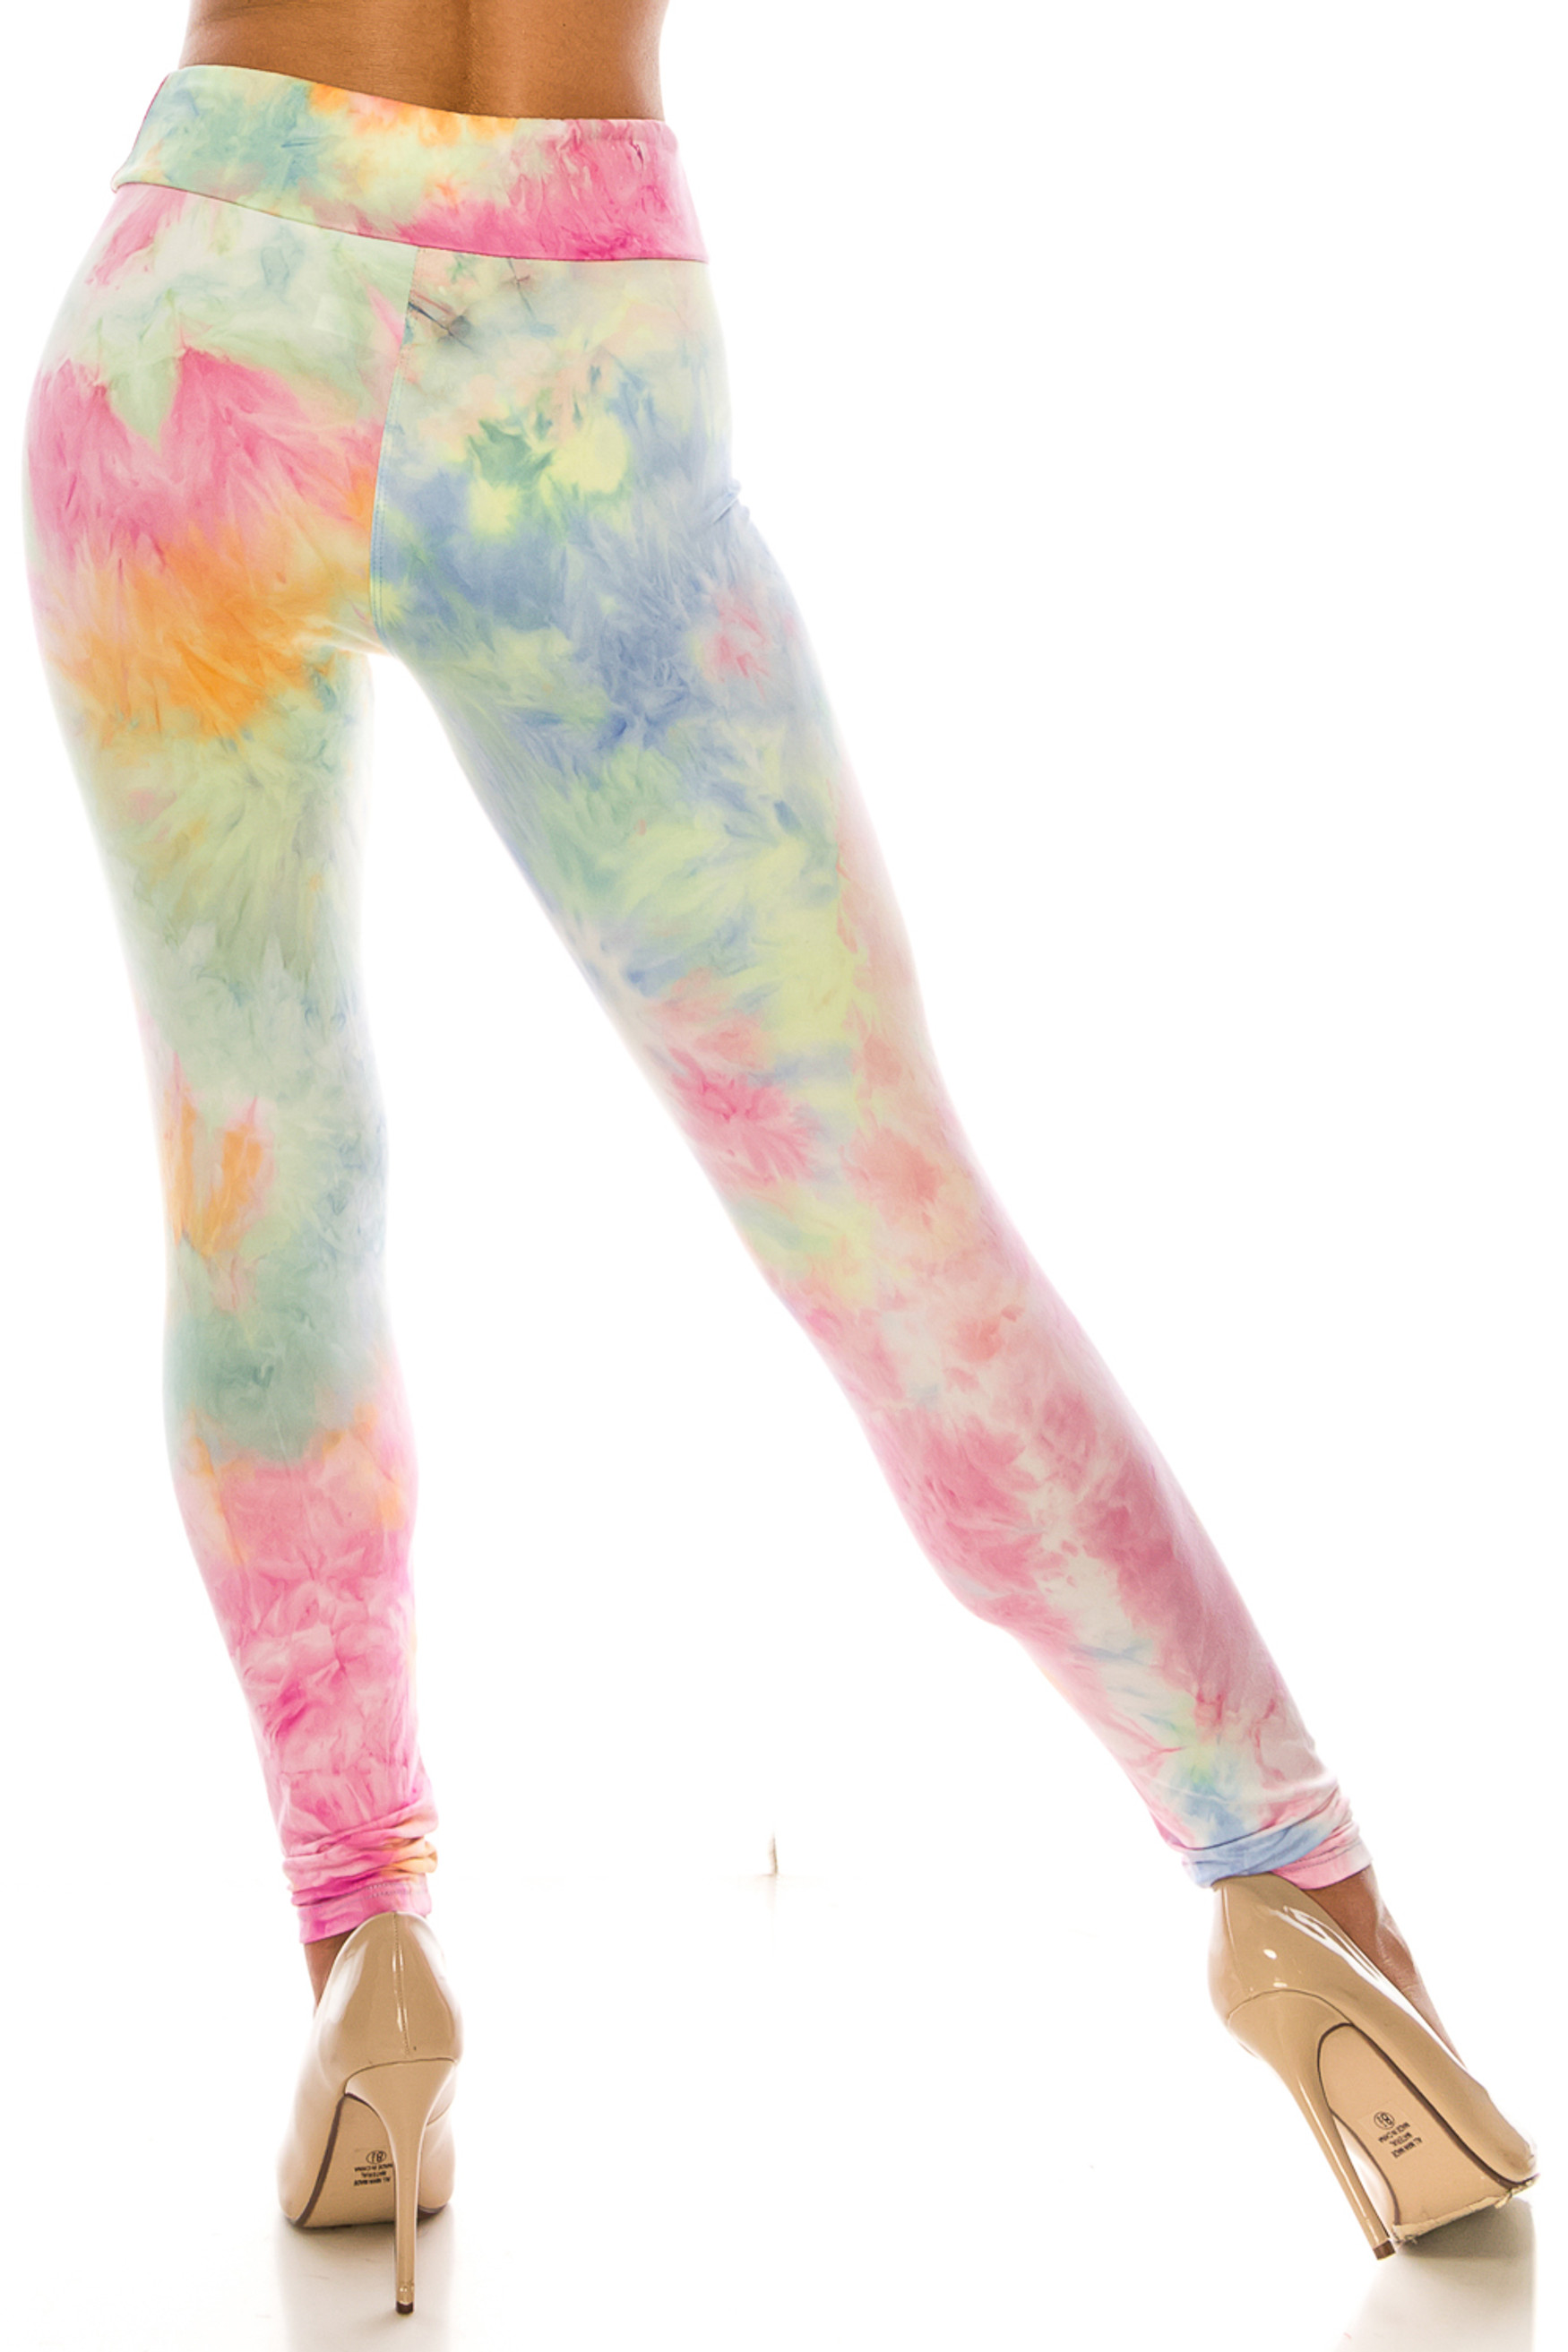 Back side image of Buttery Soft Multi-Color Pastel Tie Dye High Waisted Leggings  showing off the stunning continued design.